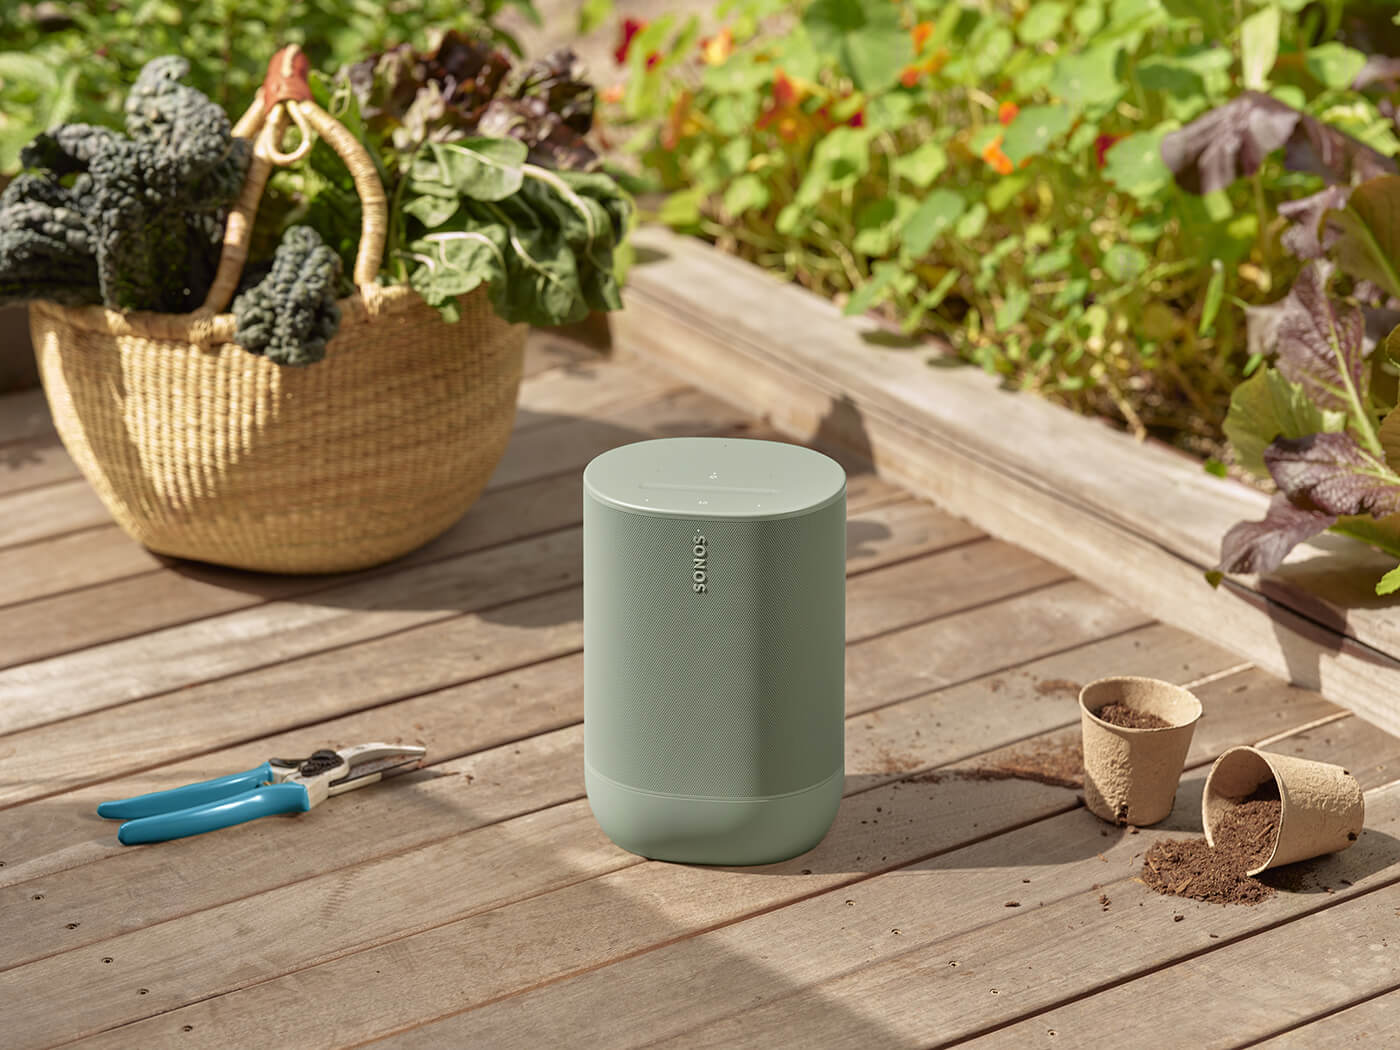 Sonos Move 2 in Olive, in use outdoors